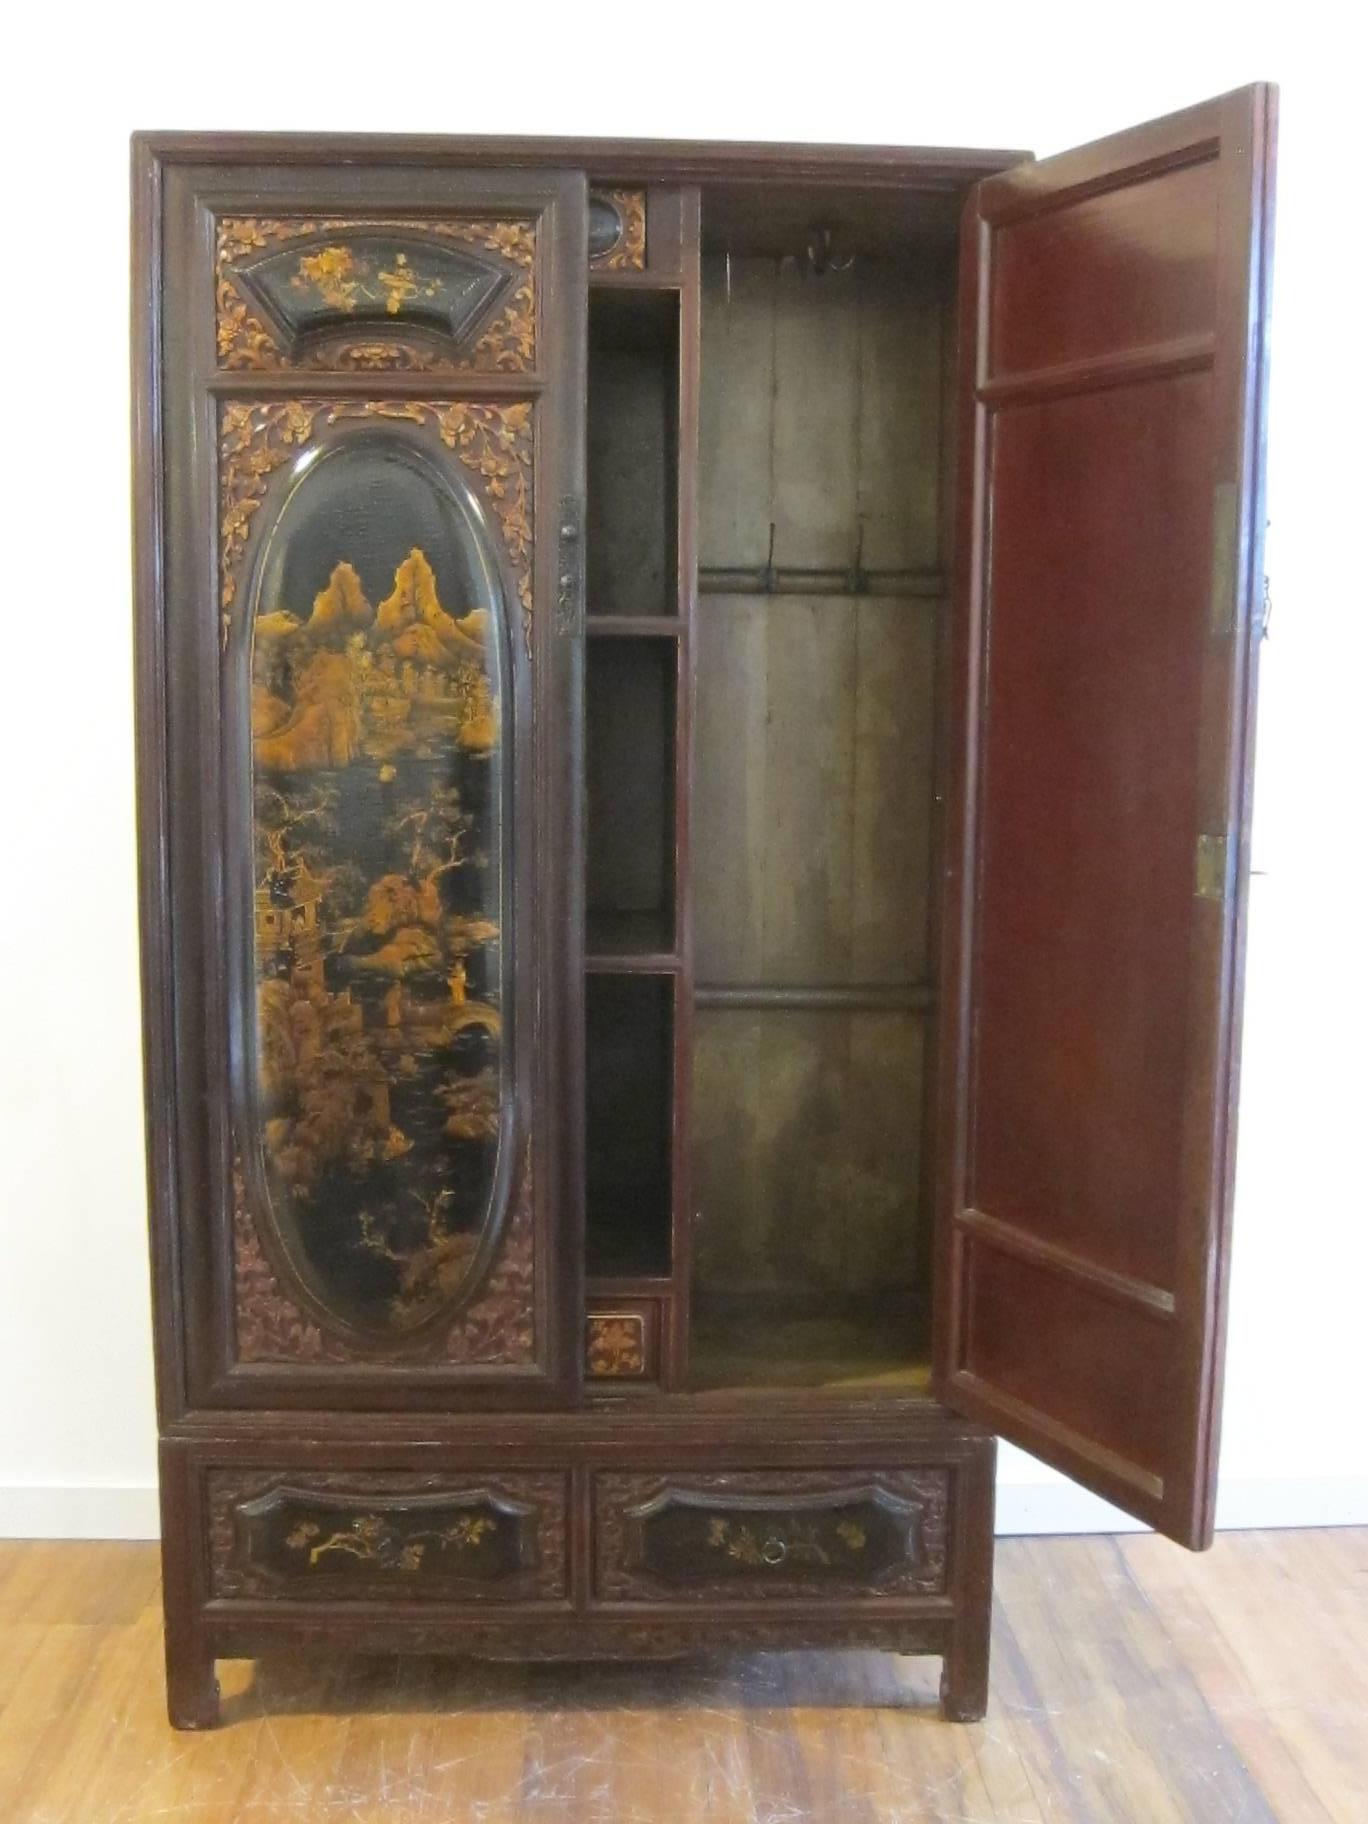 19th century gilt painted wardrobe cabinet. A very special Qing dynasty wedding cabinet elaborately decorated with fine and exceptional gilt painting. The lacquer can be referred to as having a snake like skin or (alligator-ing) this happens through